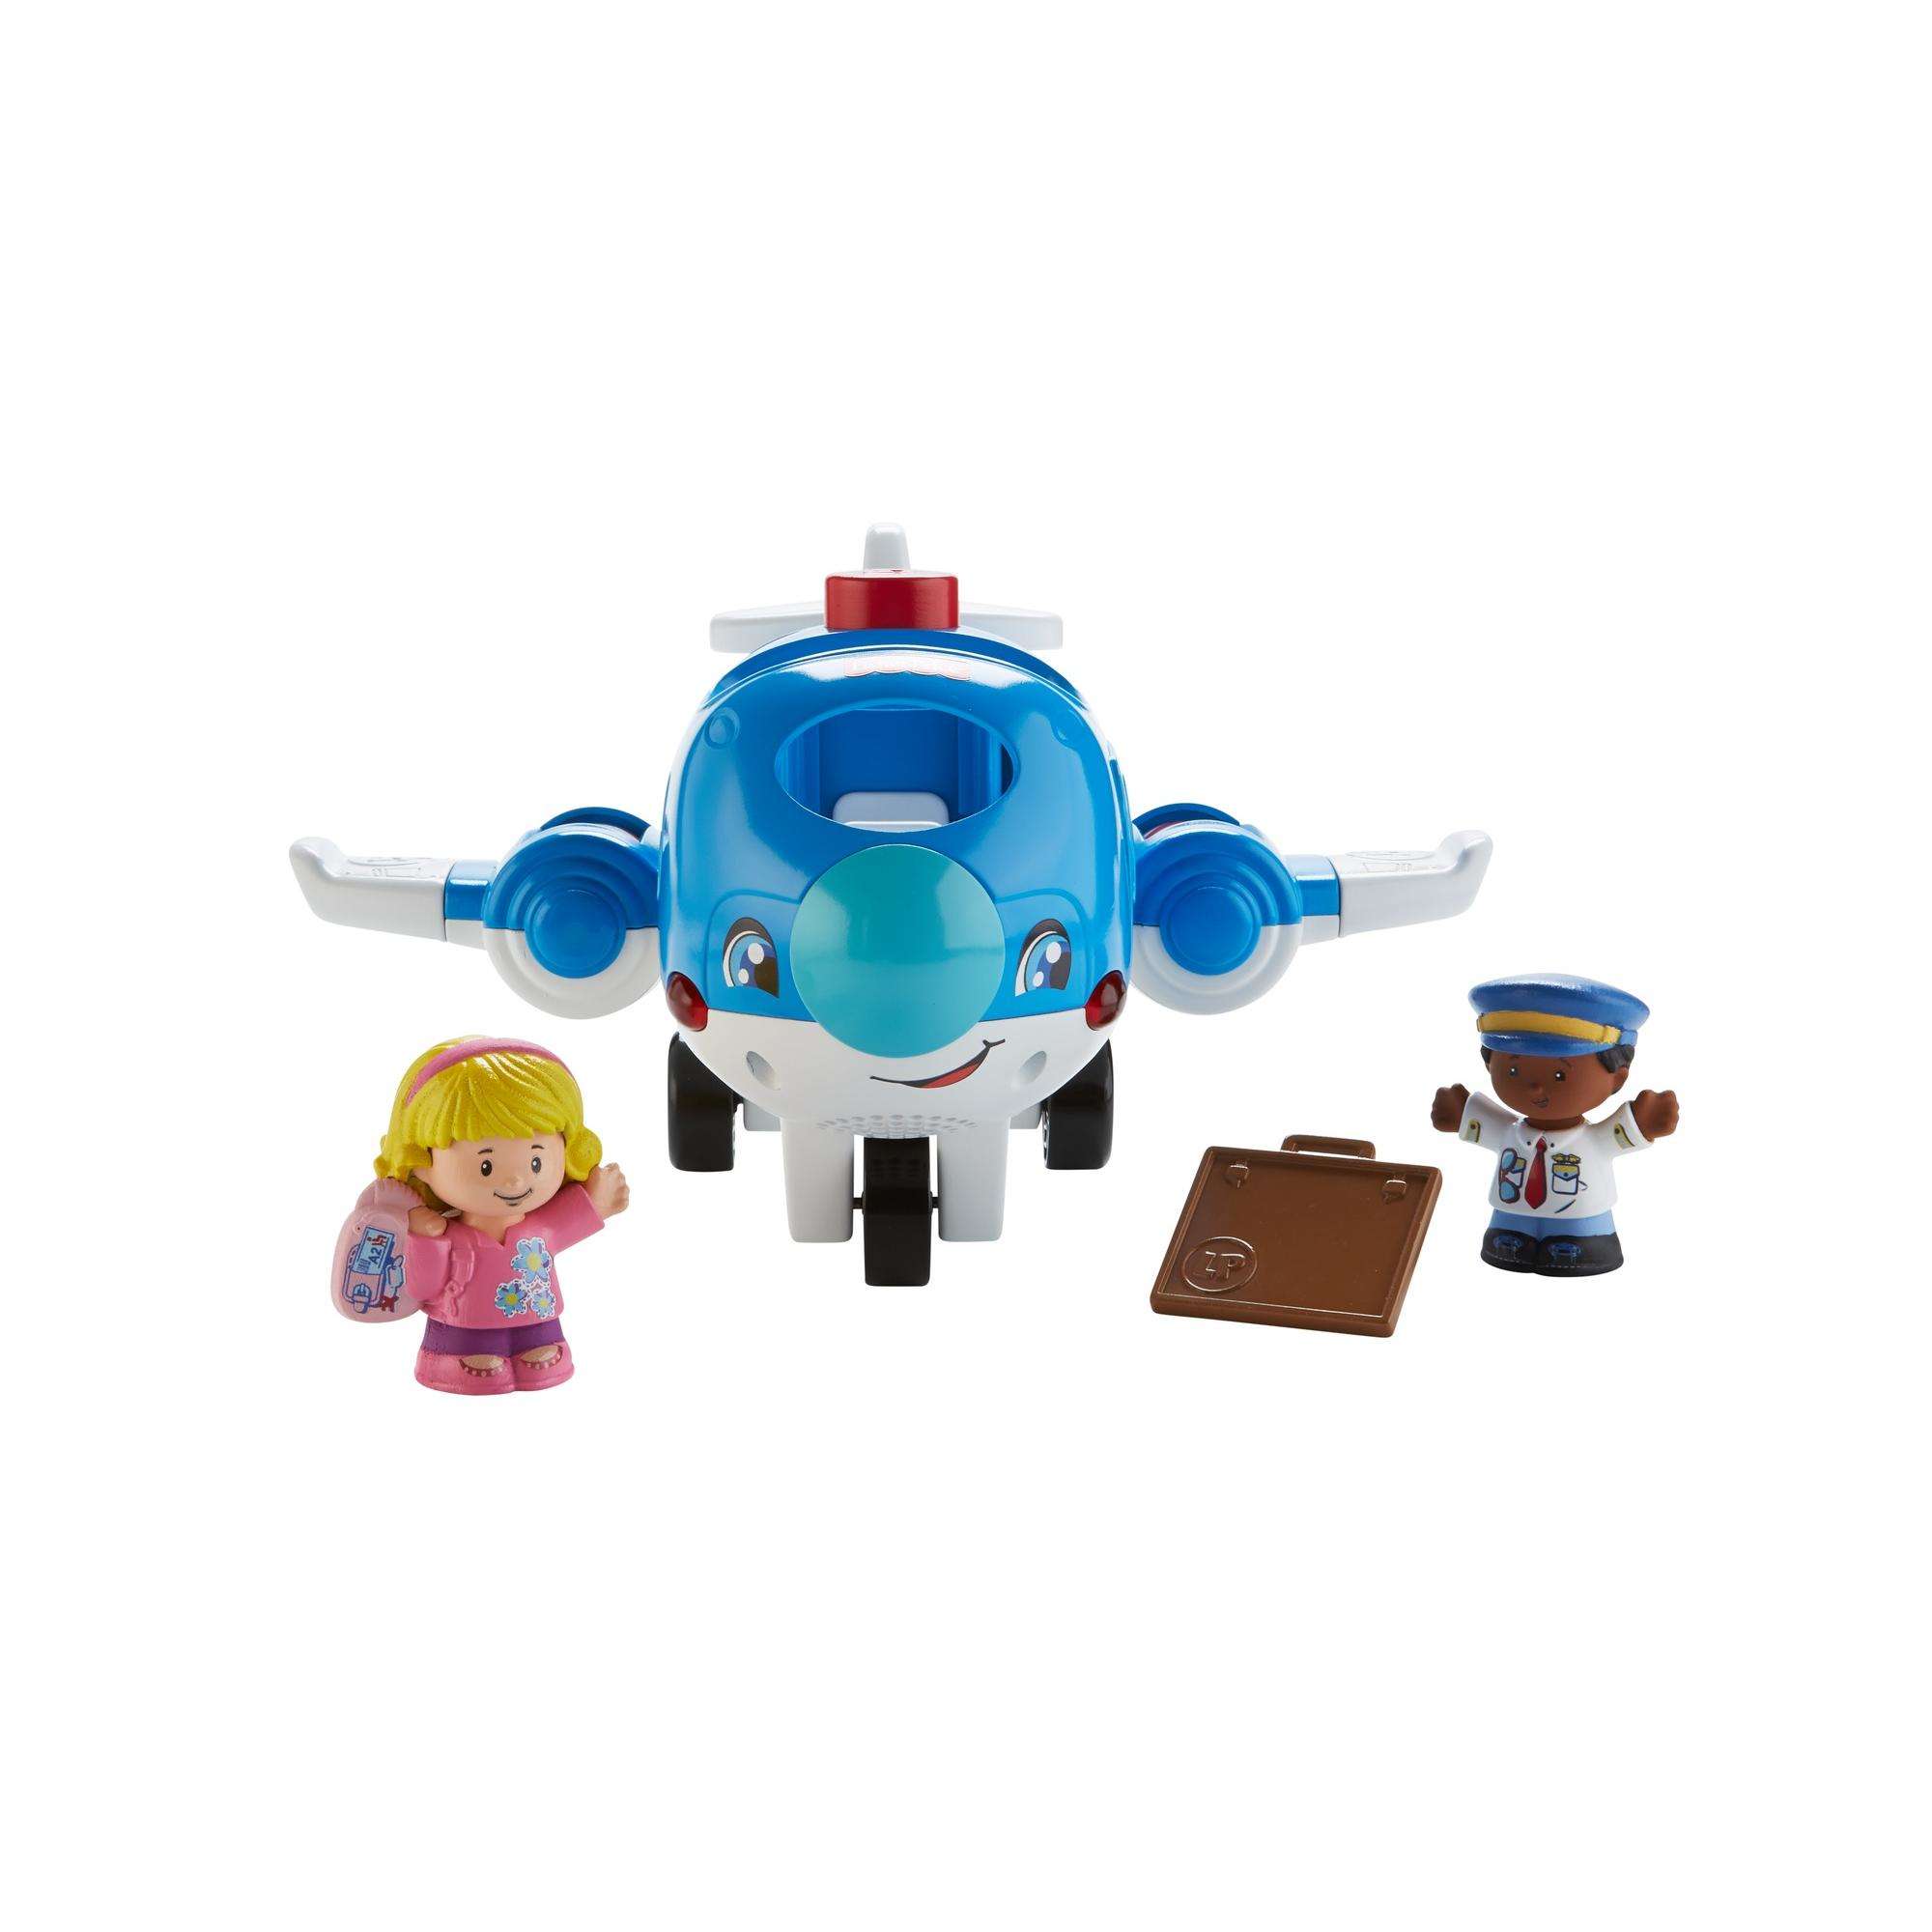 Fisher-Price - Little People - Travle Together Airplane (danish) (FMT31)